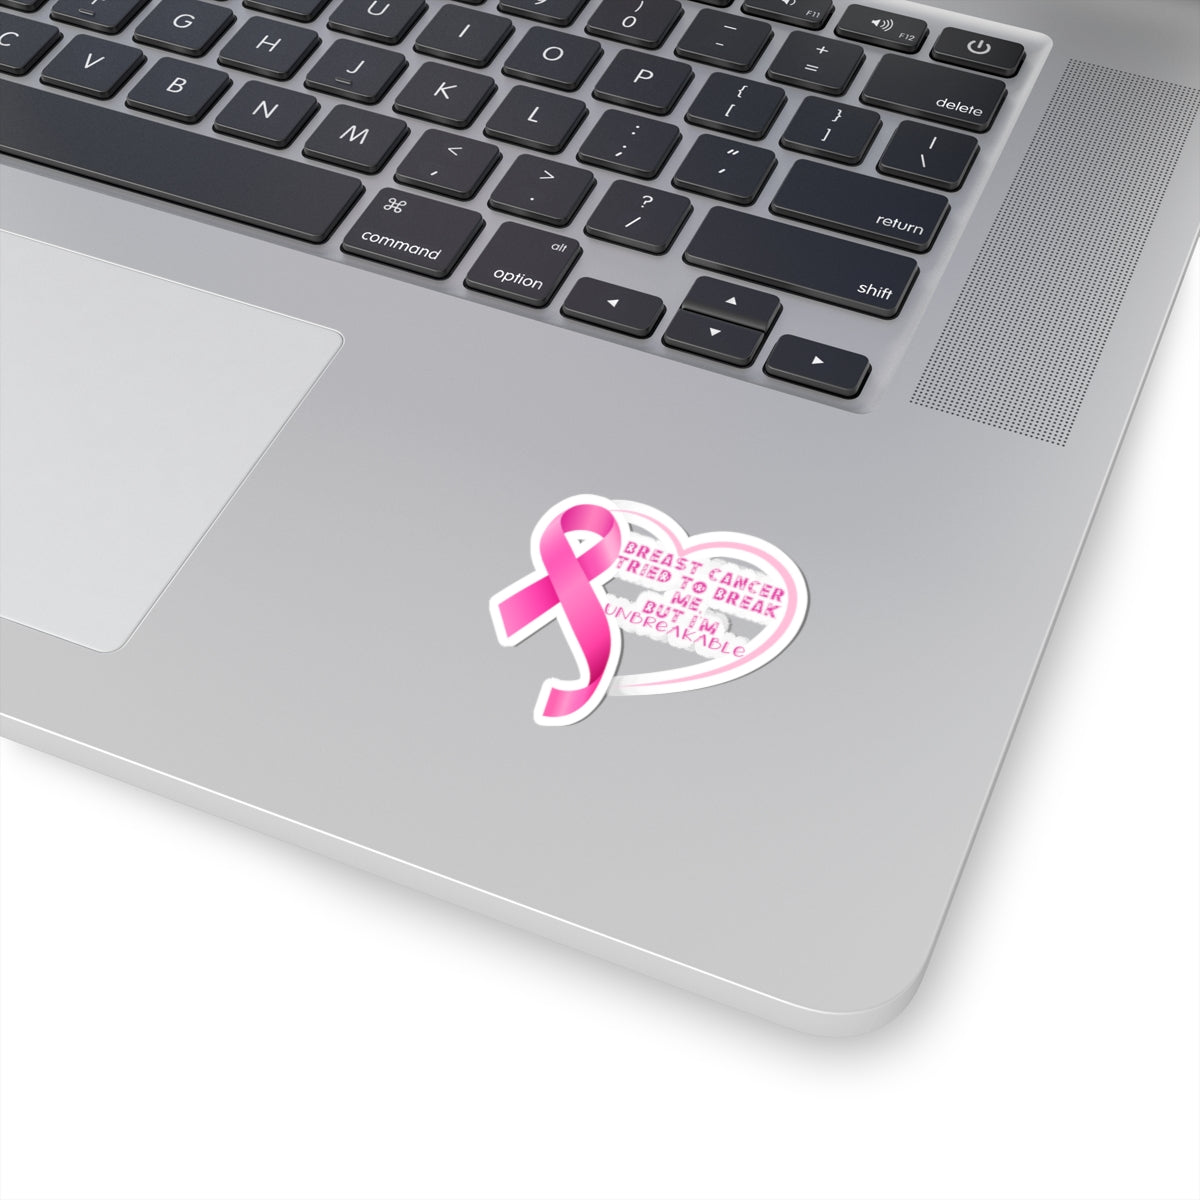 Breast Cancer Unbreakable Inspirational Quote Kiss-Cut Stickers-Paper products-mysticalcherry